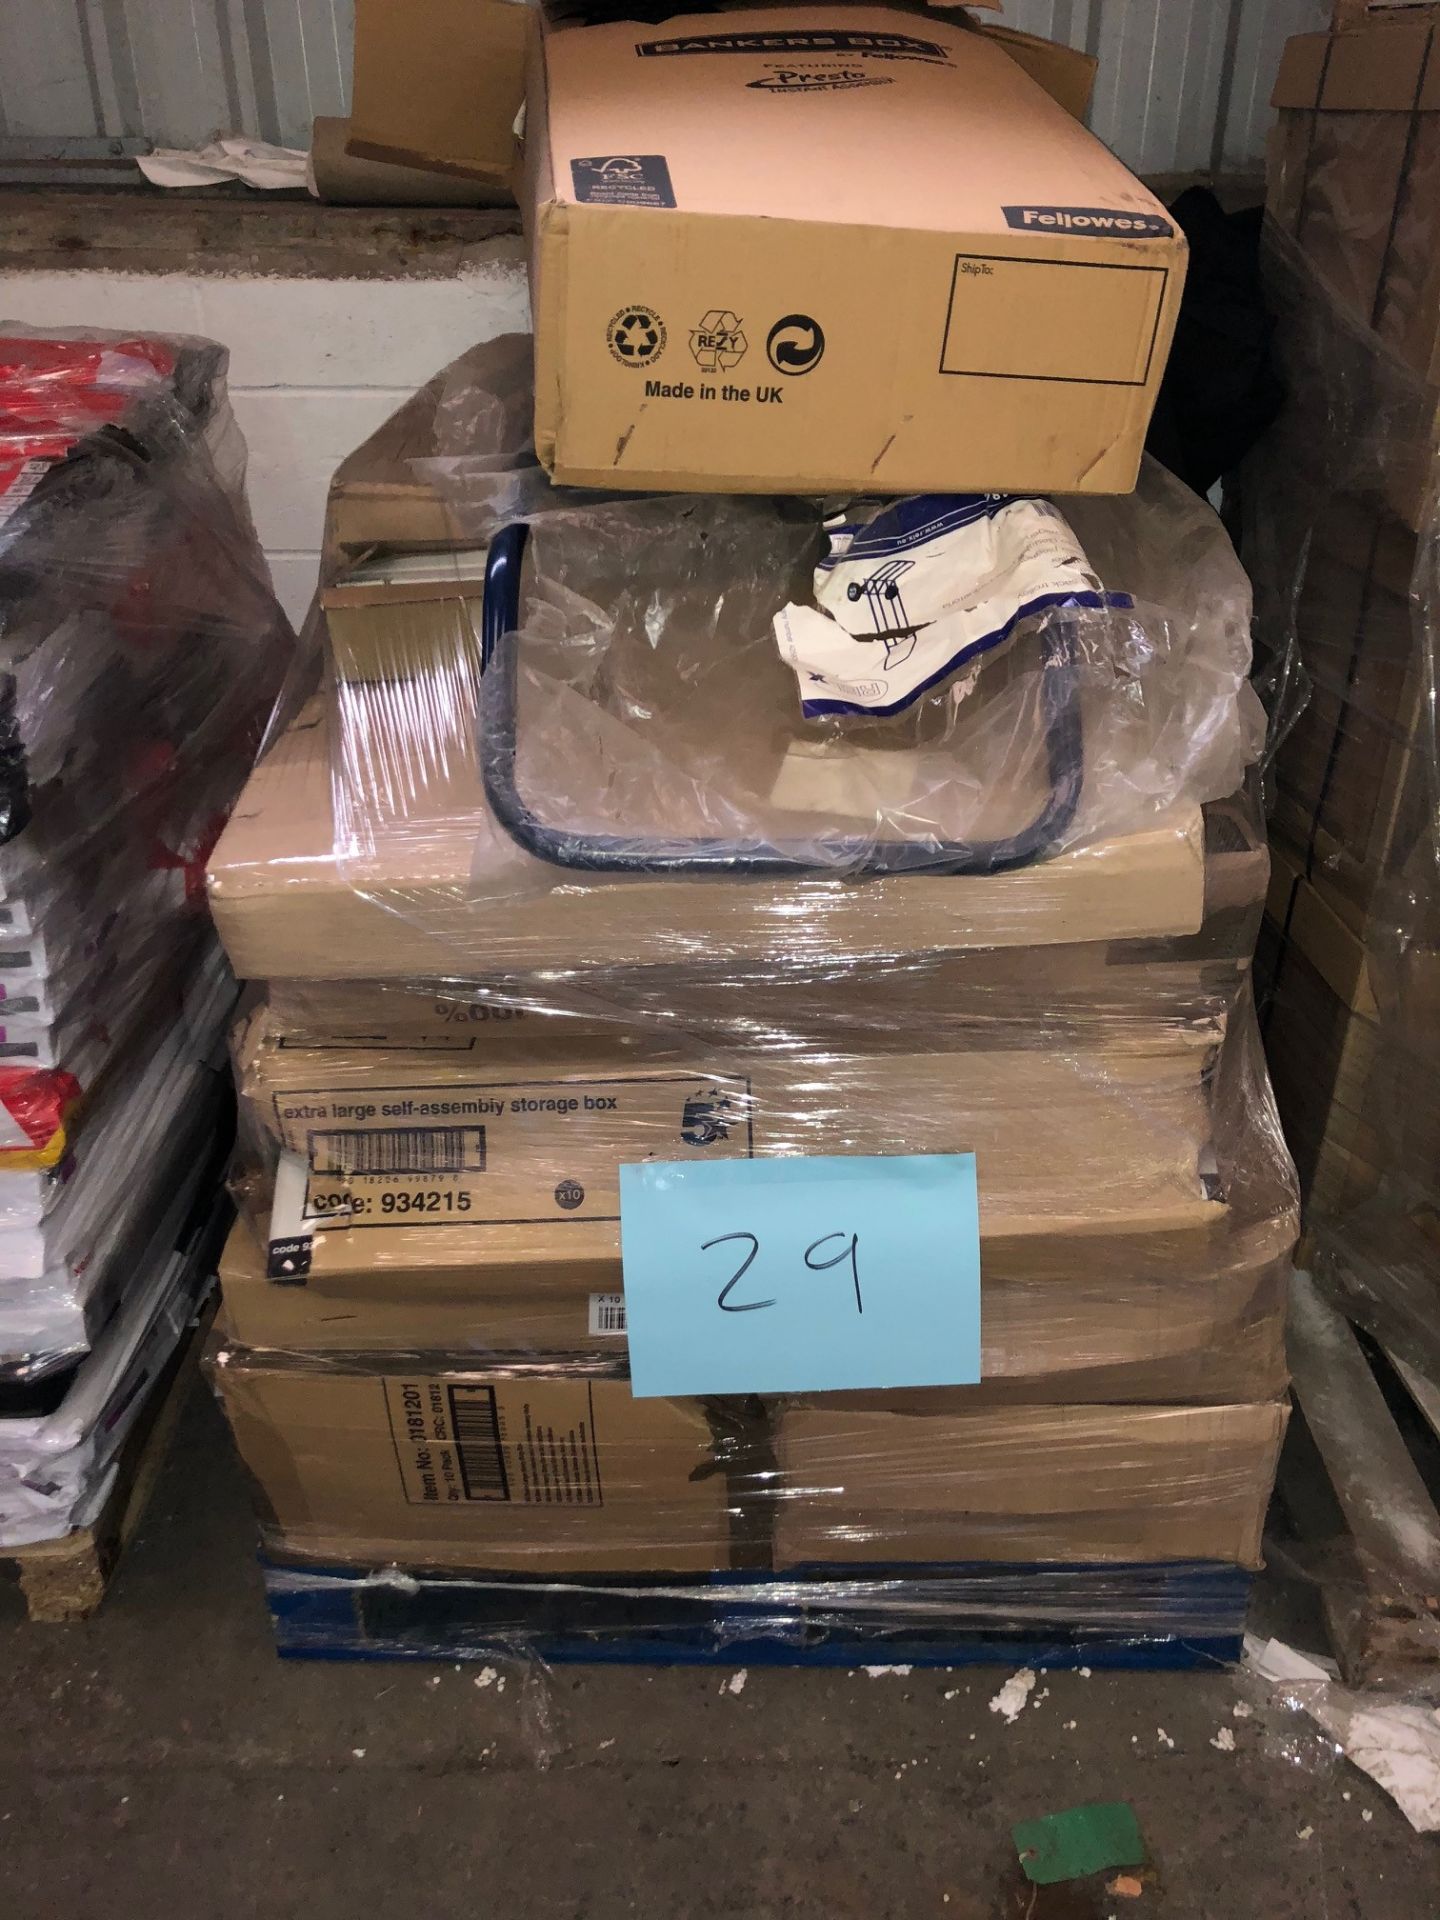 1 x Pallet of Mixed Stock/Stationery